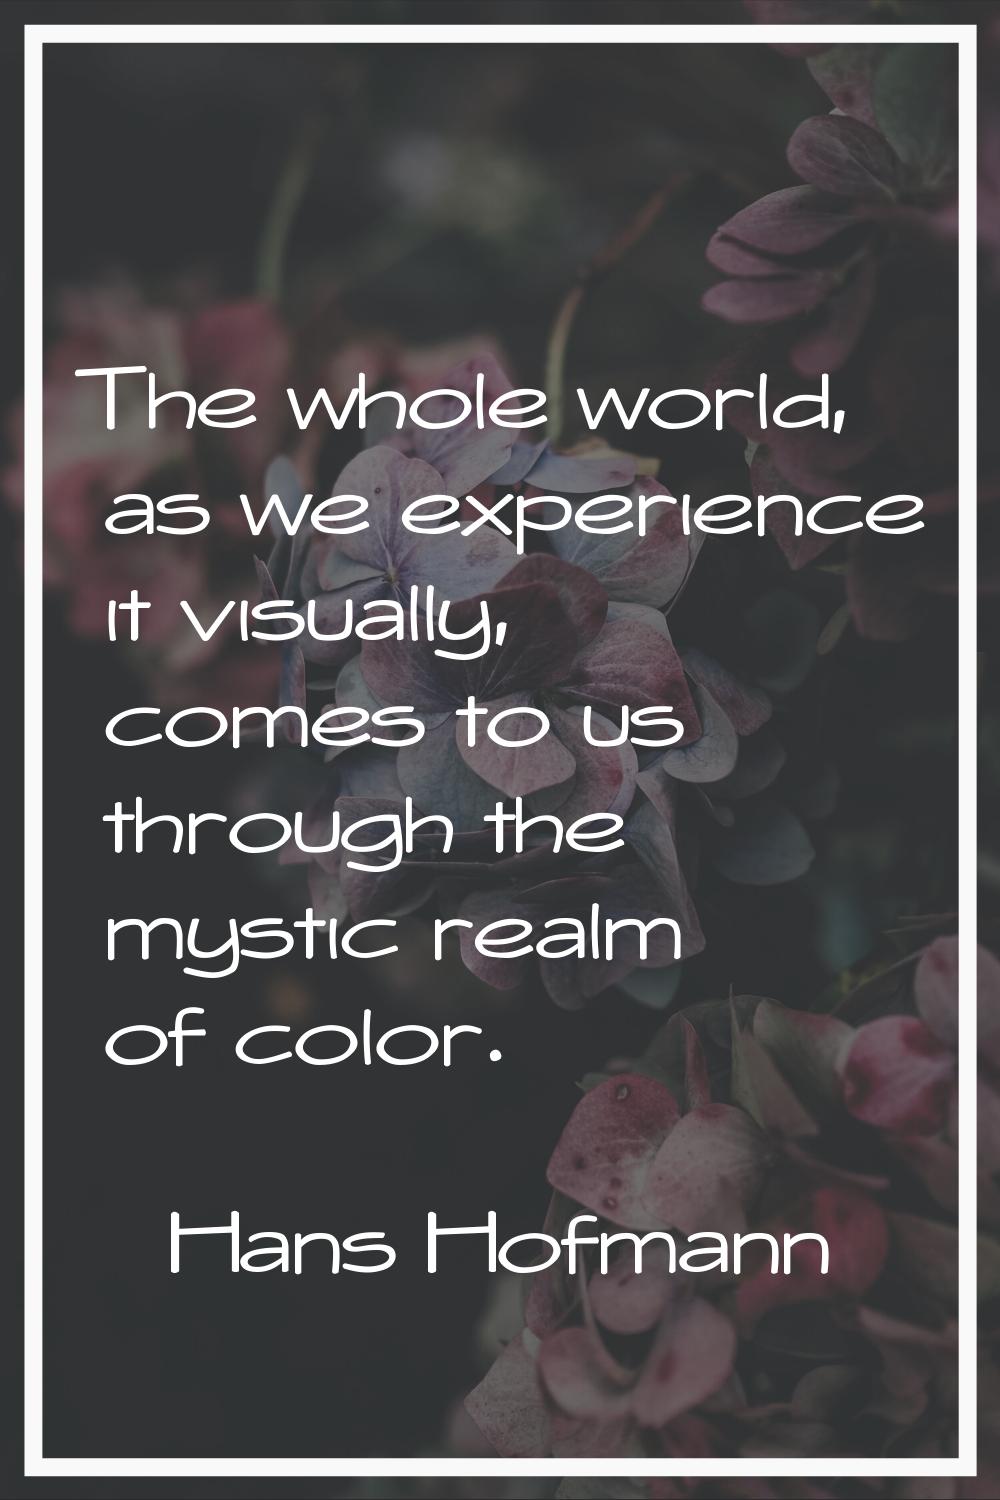 The whole world, as we experience it visually, comes to us through the mystic realm of color.